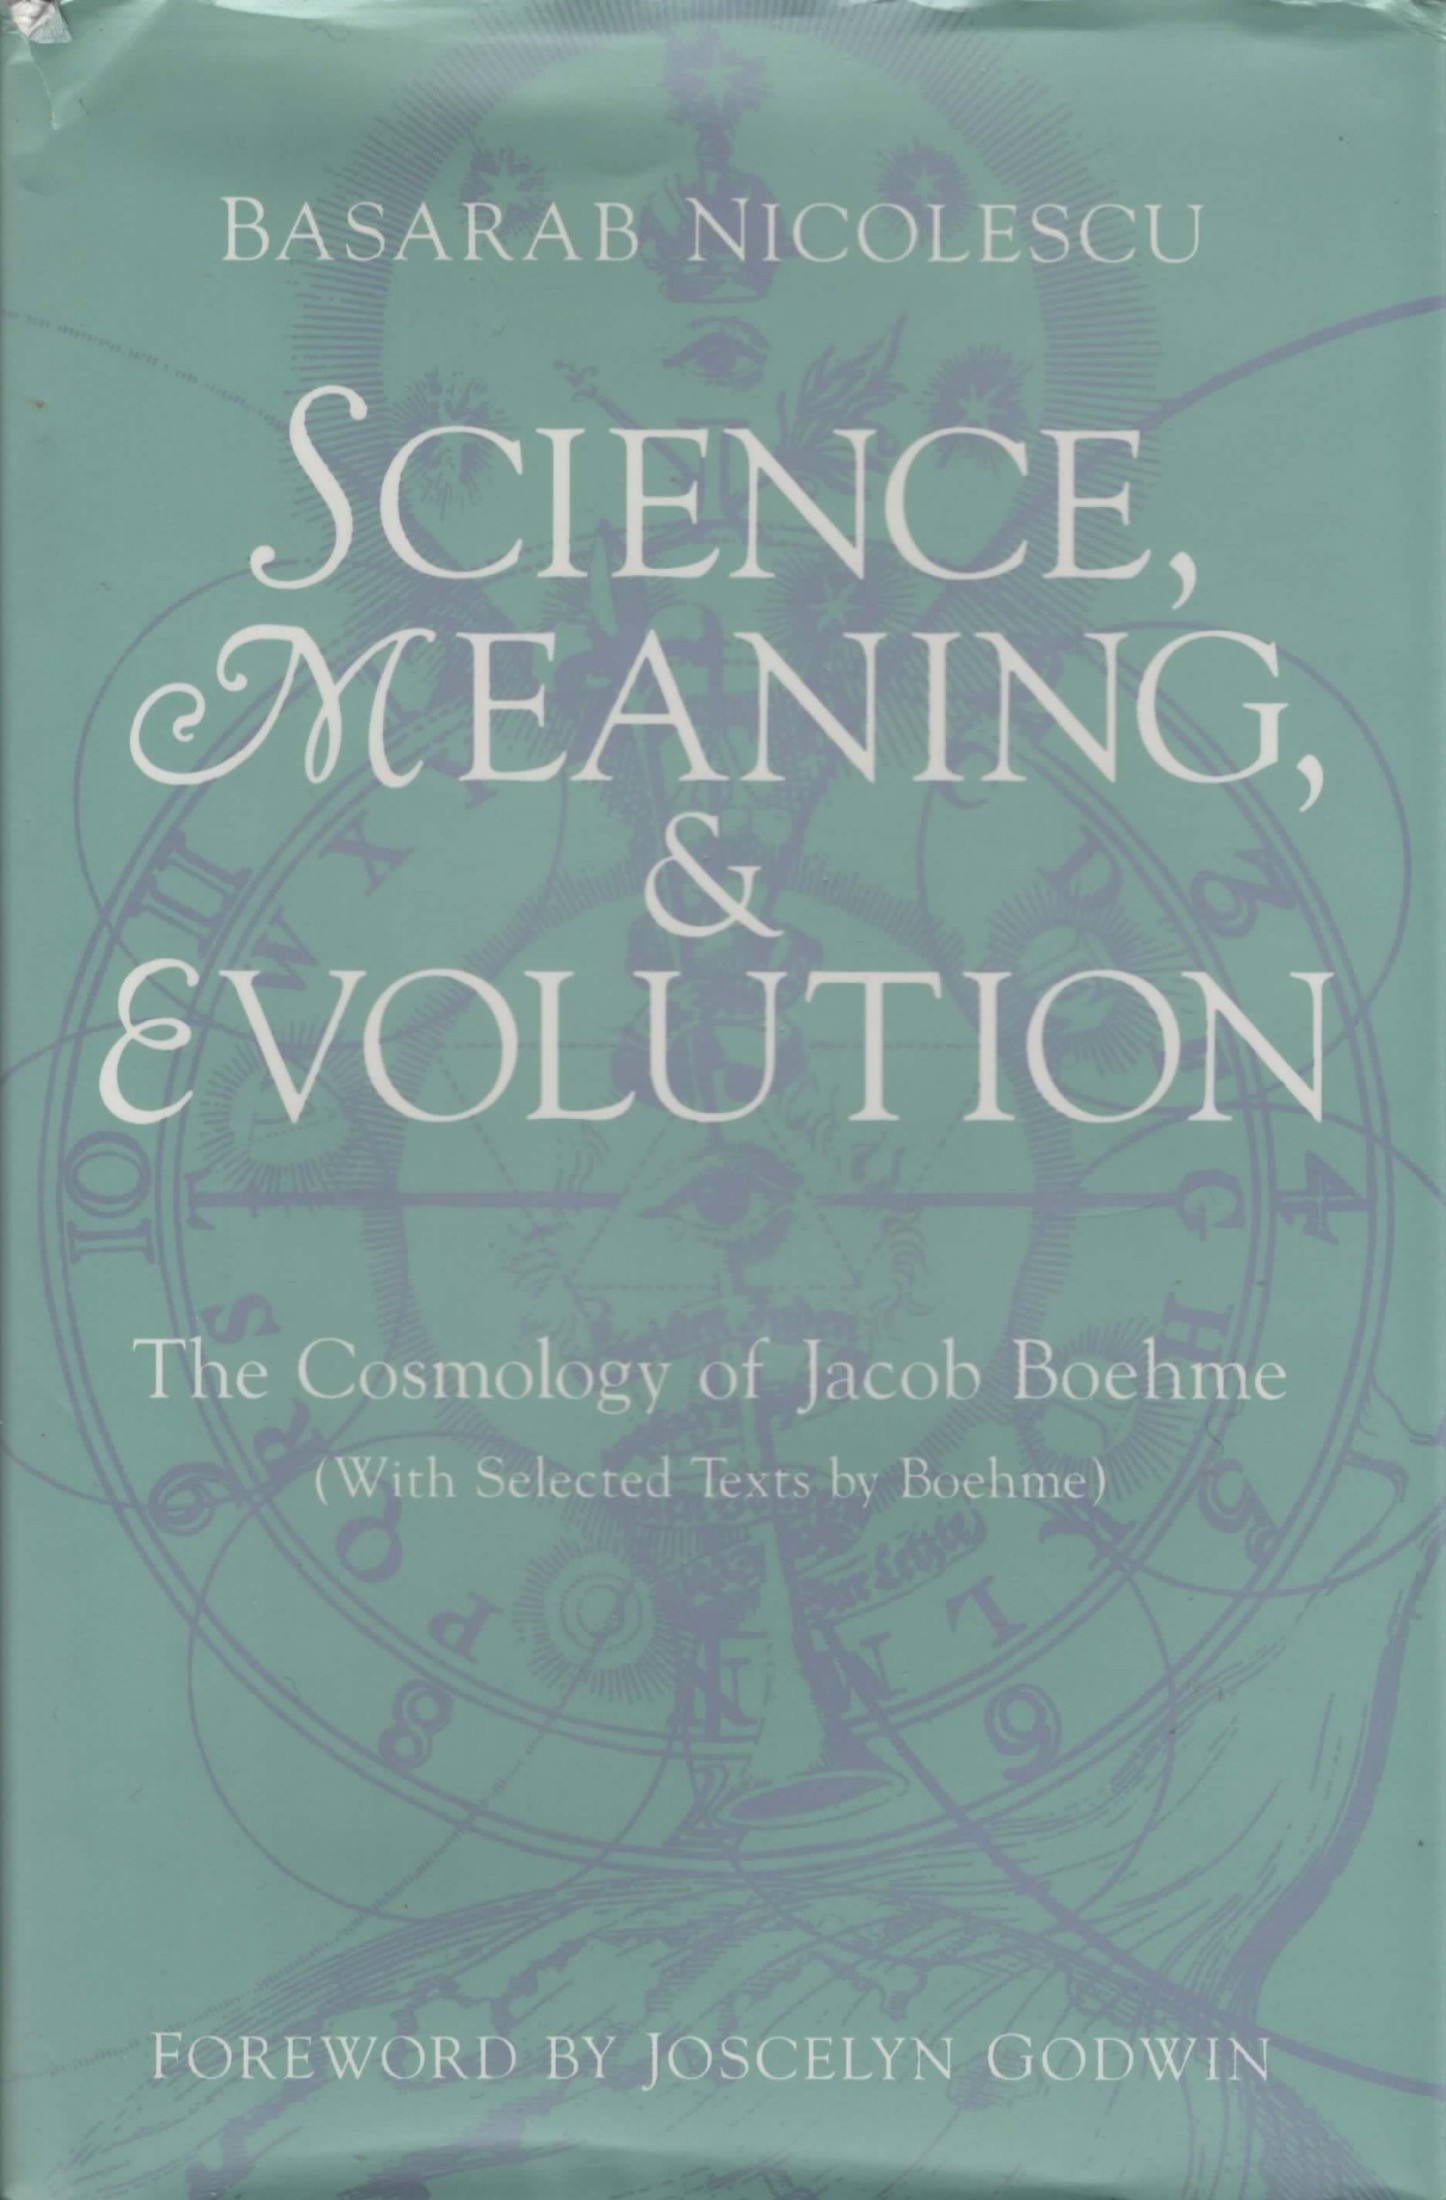 Science, Meaning, & Evolution: The Cosmology of Jacob Boehme